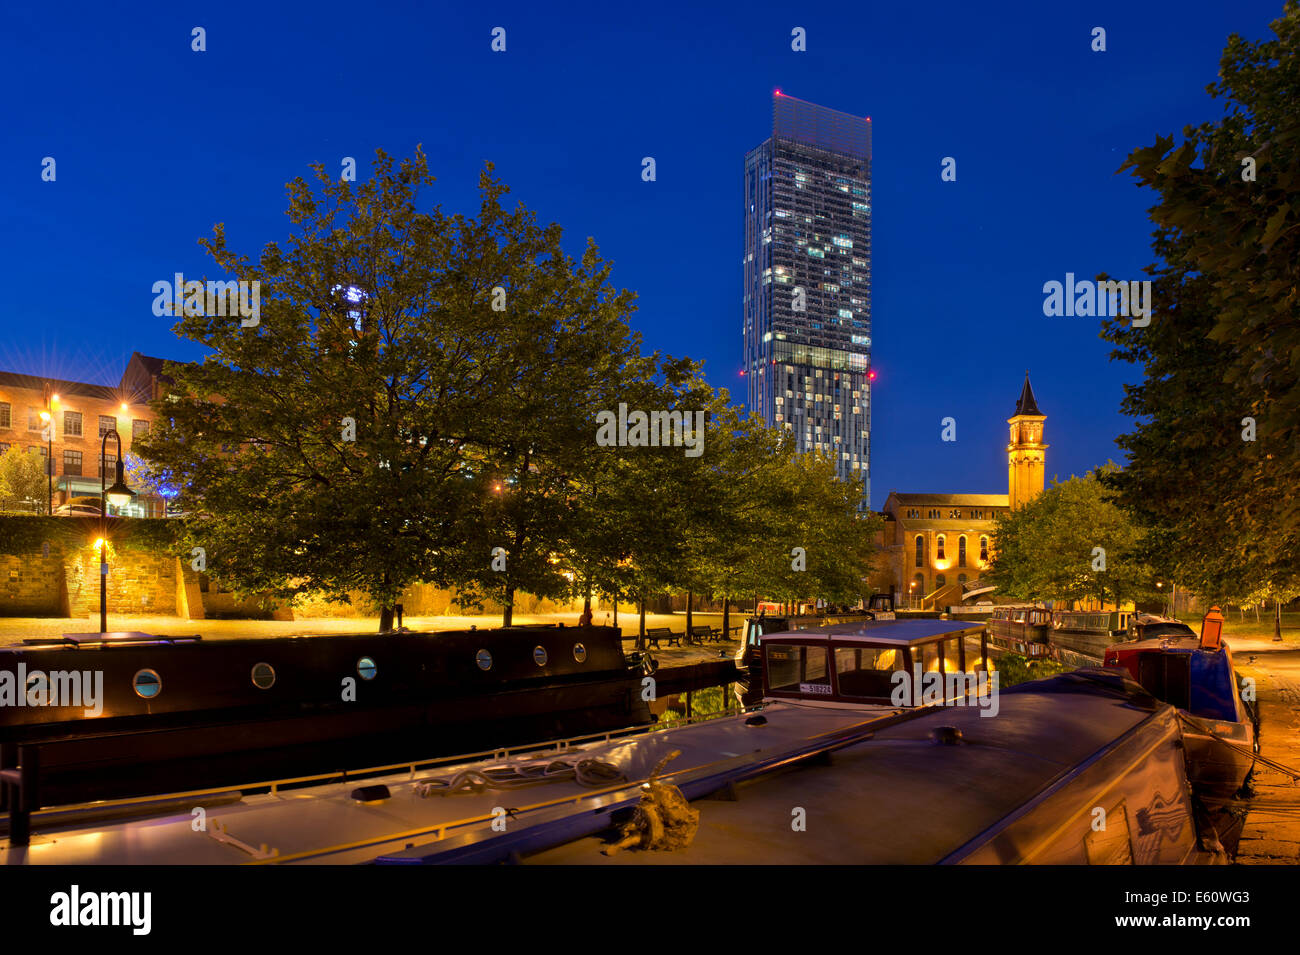 The Castlefield Urban Heritage Park and historic inner city canal conservation area with Beetham Tower in Manchester at night. Stock Photo